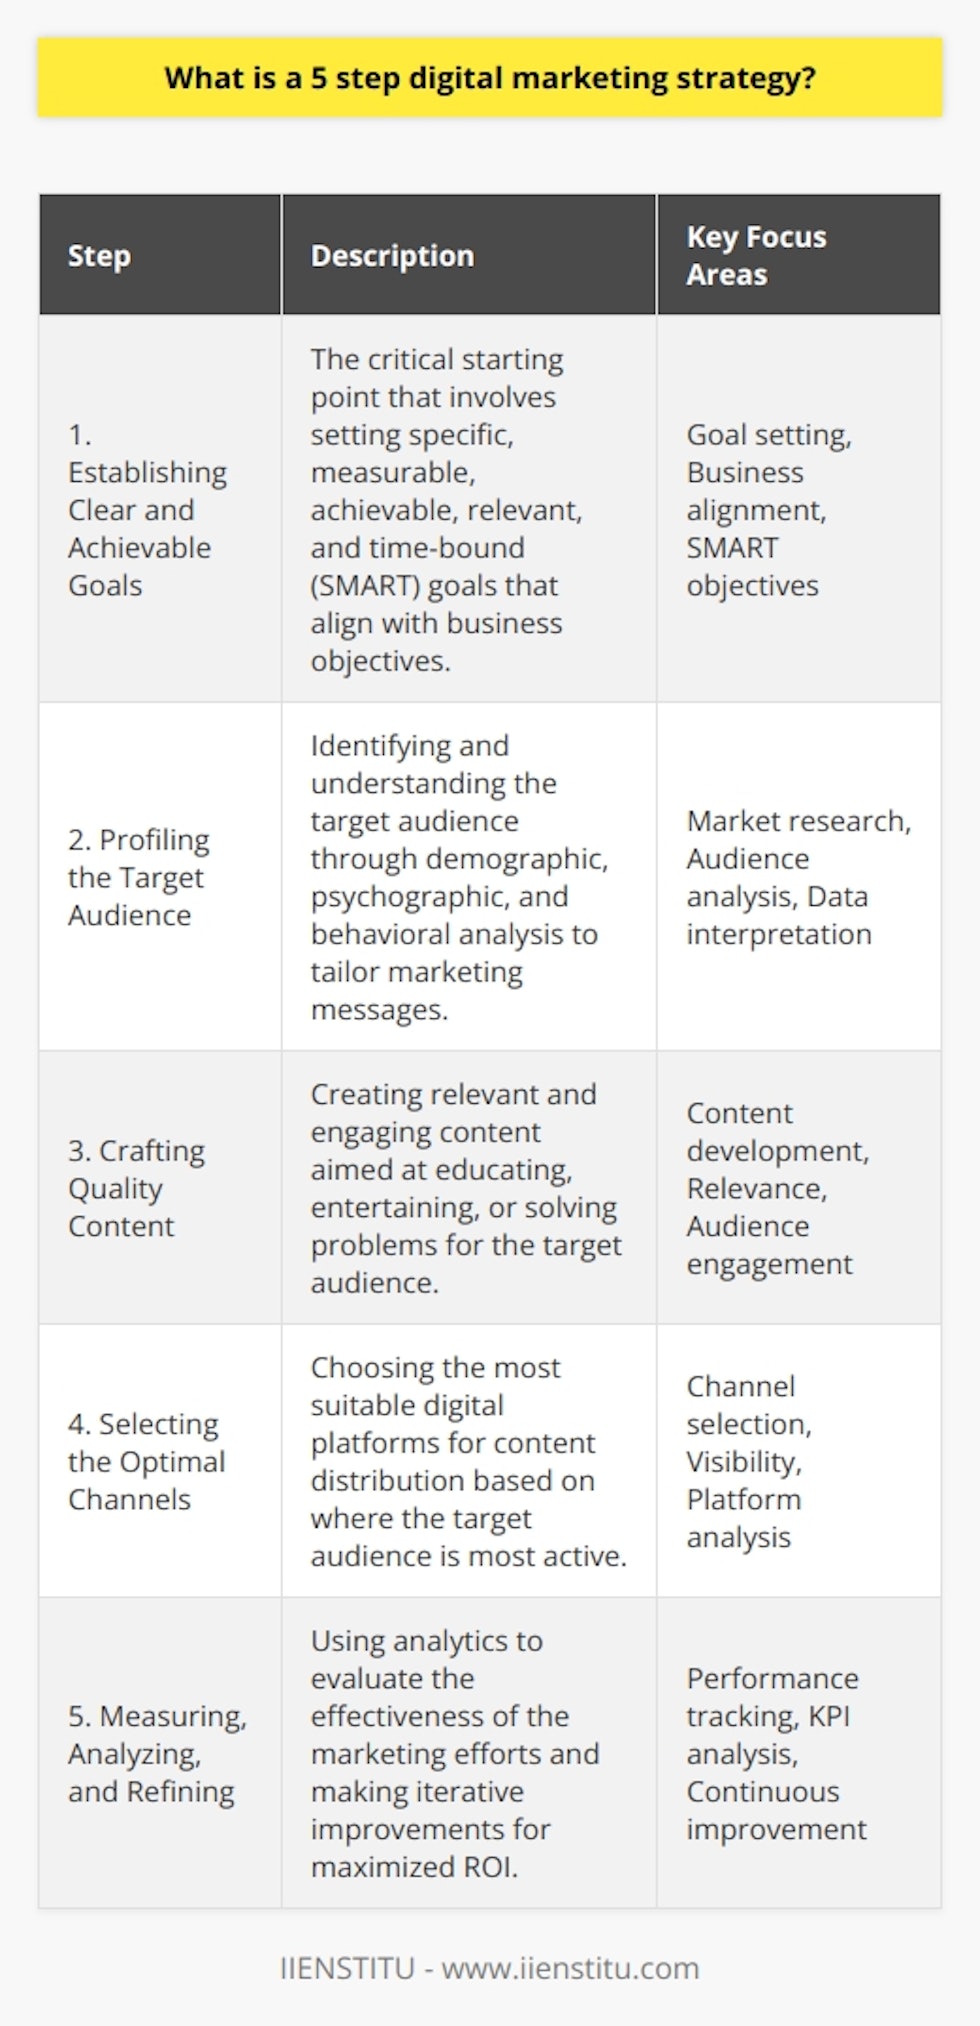 A 5-step digital marketing strategy serves as the backbone of effective online marketing operations. It is designed to guide businesses through the murky waters of the internet to reach and convert their desired audience. Here's a closer look at what each stage entails:**Step 1: Establishing Clear and Achievable Goals**The foundation of any marketing strategy is goal setting. Digital marketing goals should align with the overall business objectives and be Specific, Measurable, Achievable, Relevant, and Time-bound (SMART). Whether the aim is to increase brand awareness, boost sales, or enhance customer engagement, having clear goals gives direction to the campaign.**Step 2: Profiling the Target Audience**Knowing the target audience is paramount. Through data analysis and market research, businesses can pinpoint who their customers are and what drives them. Profiling includes gathering details on demographics, psychographics, online behavior, and pain points. This knowledge enables marketers to craft messages that resonate deeply with their audience's needs and preferences.**Step 3: Crafting Quality Content**With audience insights in hand, creating content that appeals to potential customers is next. This step revolves around developing relevant and compelling content that educates, entertains, or solves a problem for the audience. High-quality content can take many forms, such as blog posts, videos, infographics, and podcasts, all crafted to draw in the audience and provide value.**Step 4: Selecting the Optimal Channels**It's not just what you say, but also where you say it. The right platforms for sharing content are where the target audience spends their time. This decision might encompass a mix of social media channels, search engines, email marketing, or other digital platforms. The goal is to maximize visibility and engagement by showing up where the audience is most active and receptive.**Step 5: Measuring, Analyzing, and Refining**The final step is about learning and improving. Using analytics tools, marketers can track the performance of their digital marketing efforts. Key Performance Indicators (KPIs) such as website traffic, conversion rates, and social media engagement provide insight into what's working and what's not. Regular analysis prompts continuous improvements, ensuring strategies remain effective and ROI is maximized.In the ever-evolving digital landscape, crafting a 5-step digital marketing strategy requires agility and a deep understanding of both technology and human behavior. By approaching marketing systematically, businesses can achieve cost-effective results while building a strong digital presence. This strategy, focusing on goal-oriented actions and informed decision-making, paves the road for sustained growth in an increasingly digital-centric business environment. The principle is to attract, captivate, convert, and retain the digital consumer—a goal within reach with the right strategy in place.